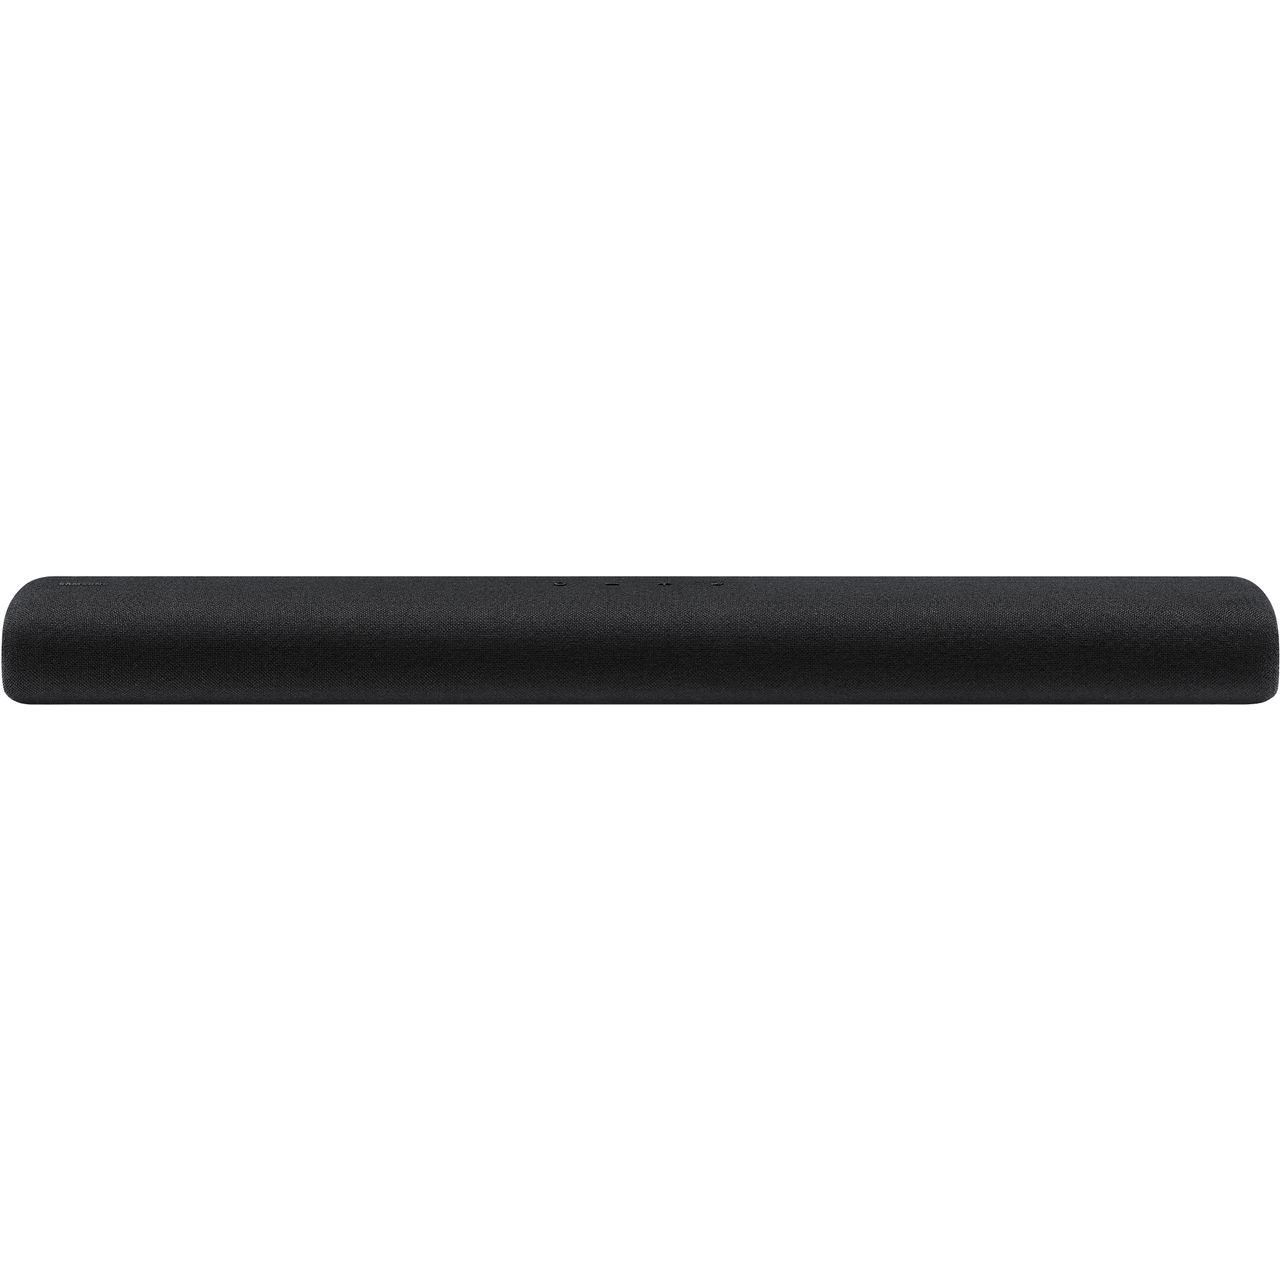 Samsung HW-S60T Bluetooth 4 Soundbar with Built-in Subwoofer Review